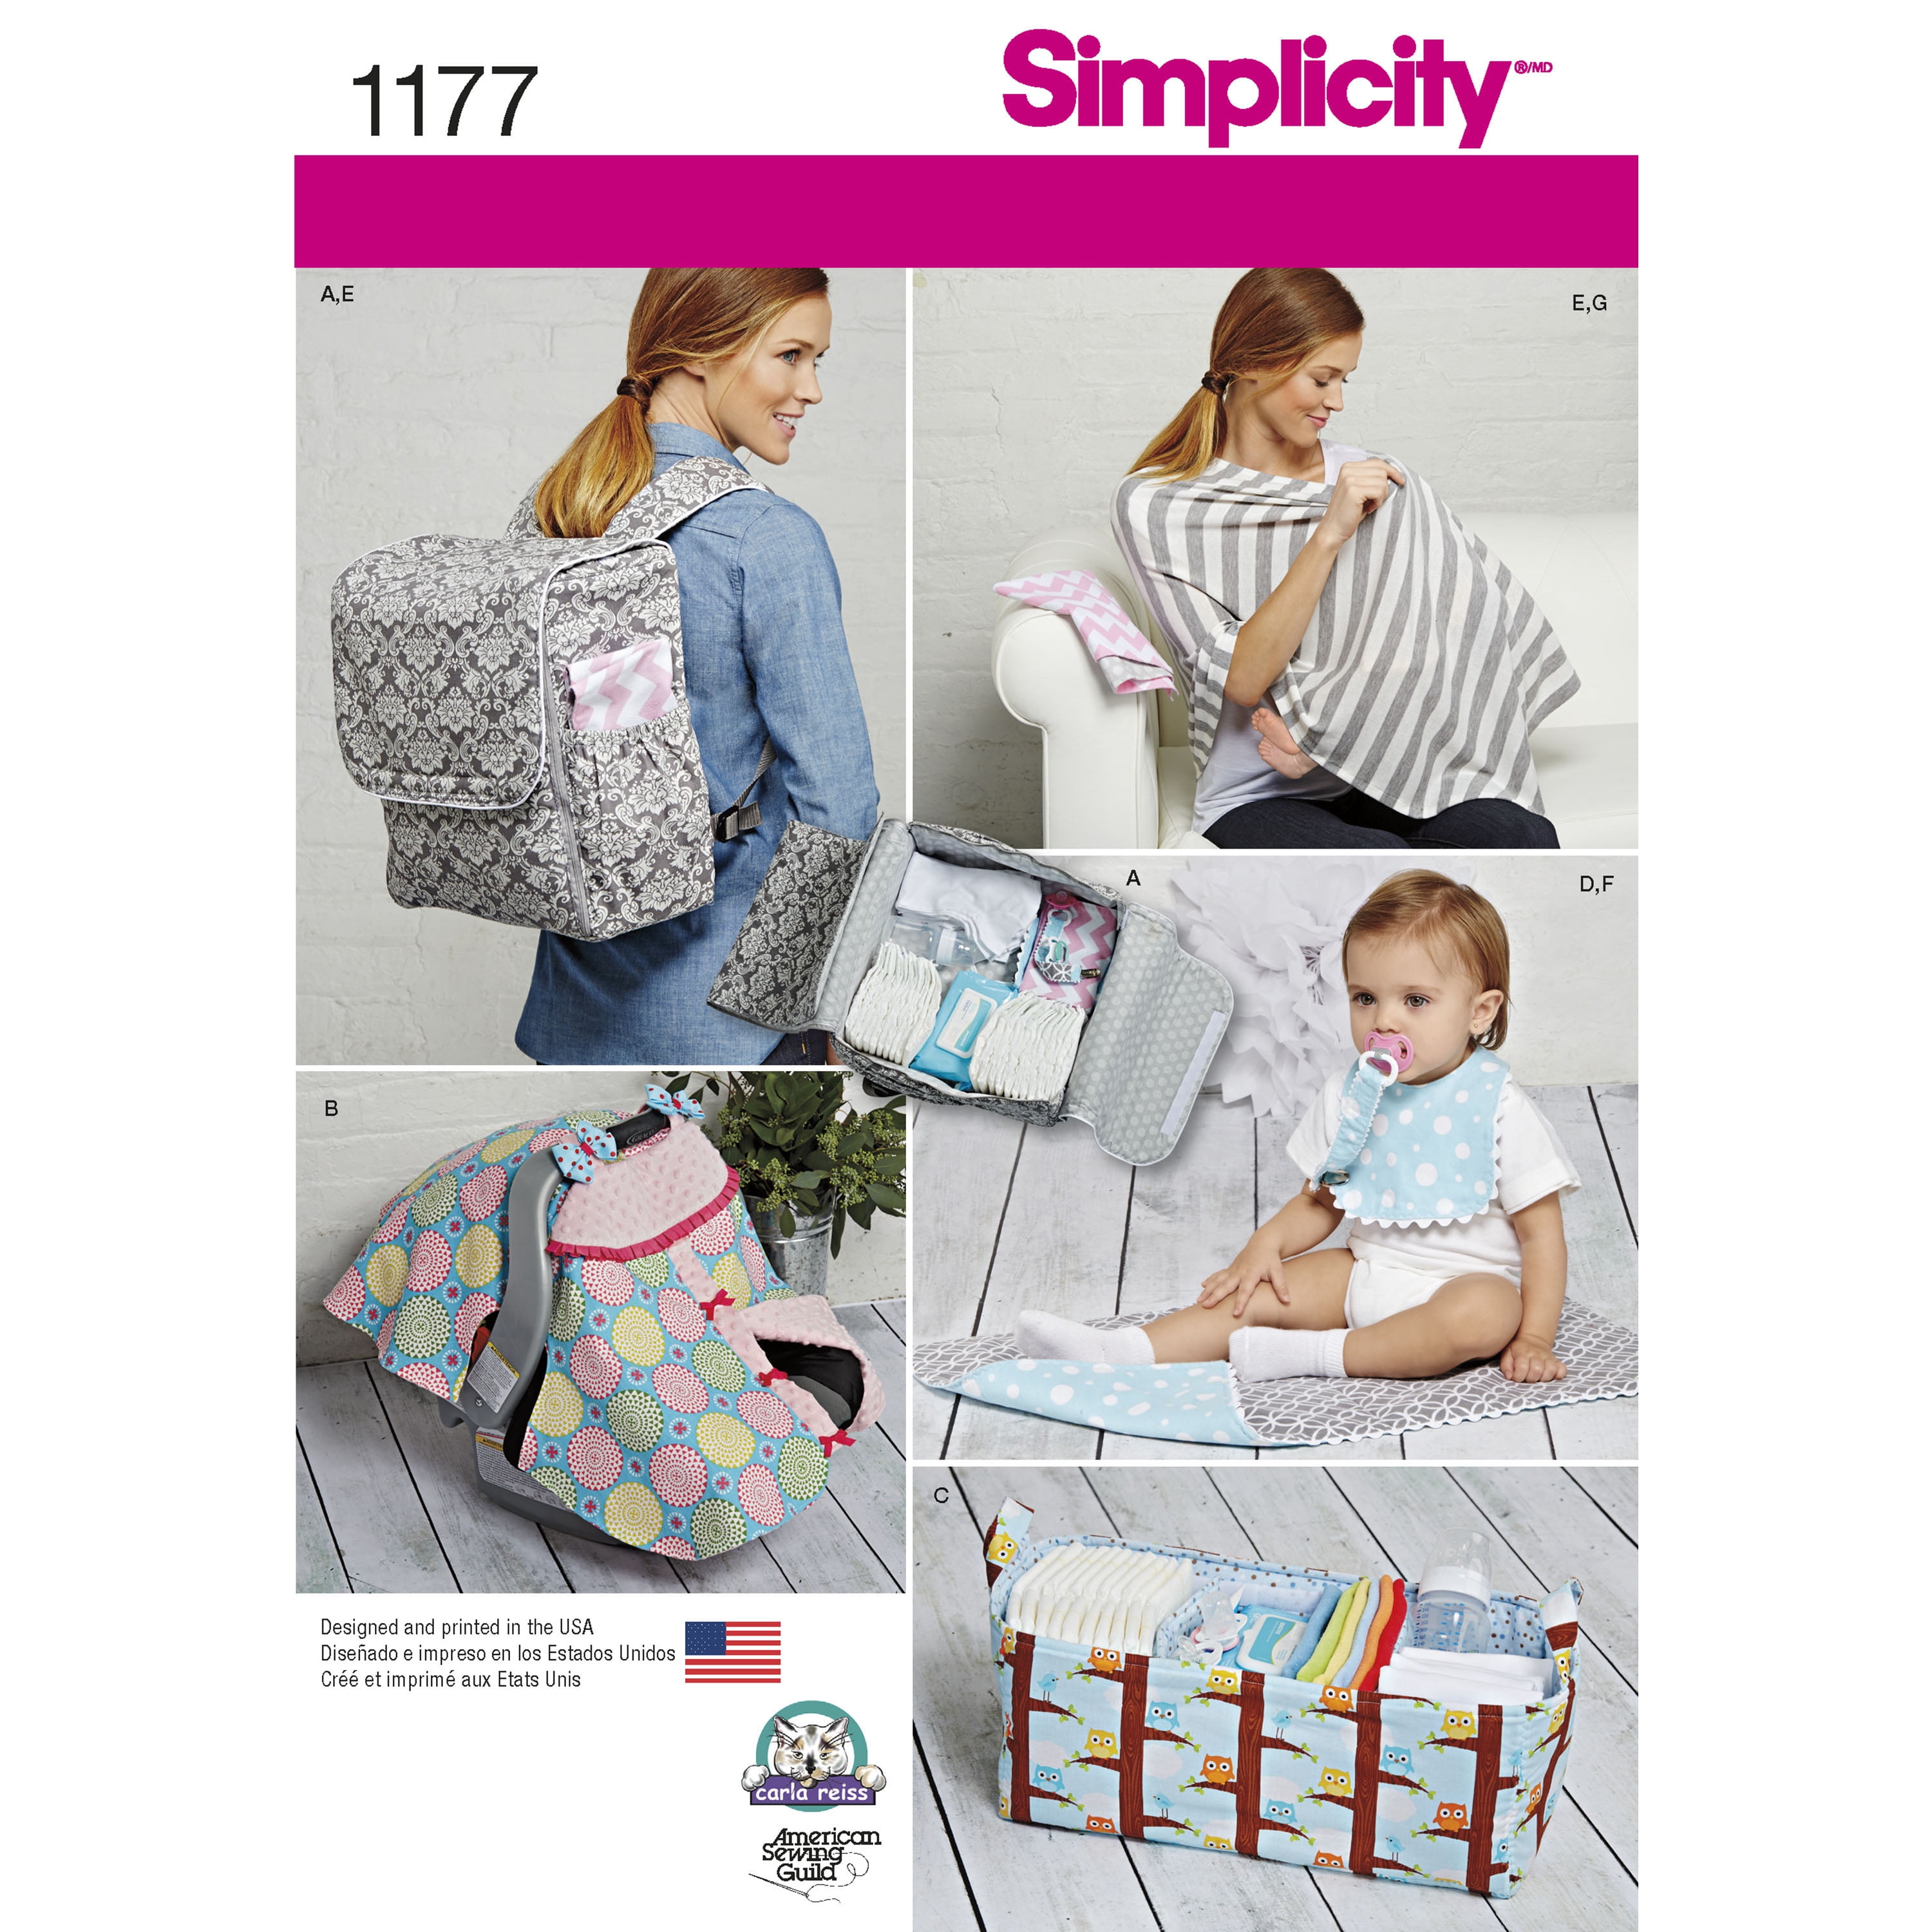  Simplicity Stuffed Kitten Sewing Patterns for Kids by Carla  Reiss, One Size Only : Arts, Crafts & Sewing